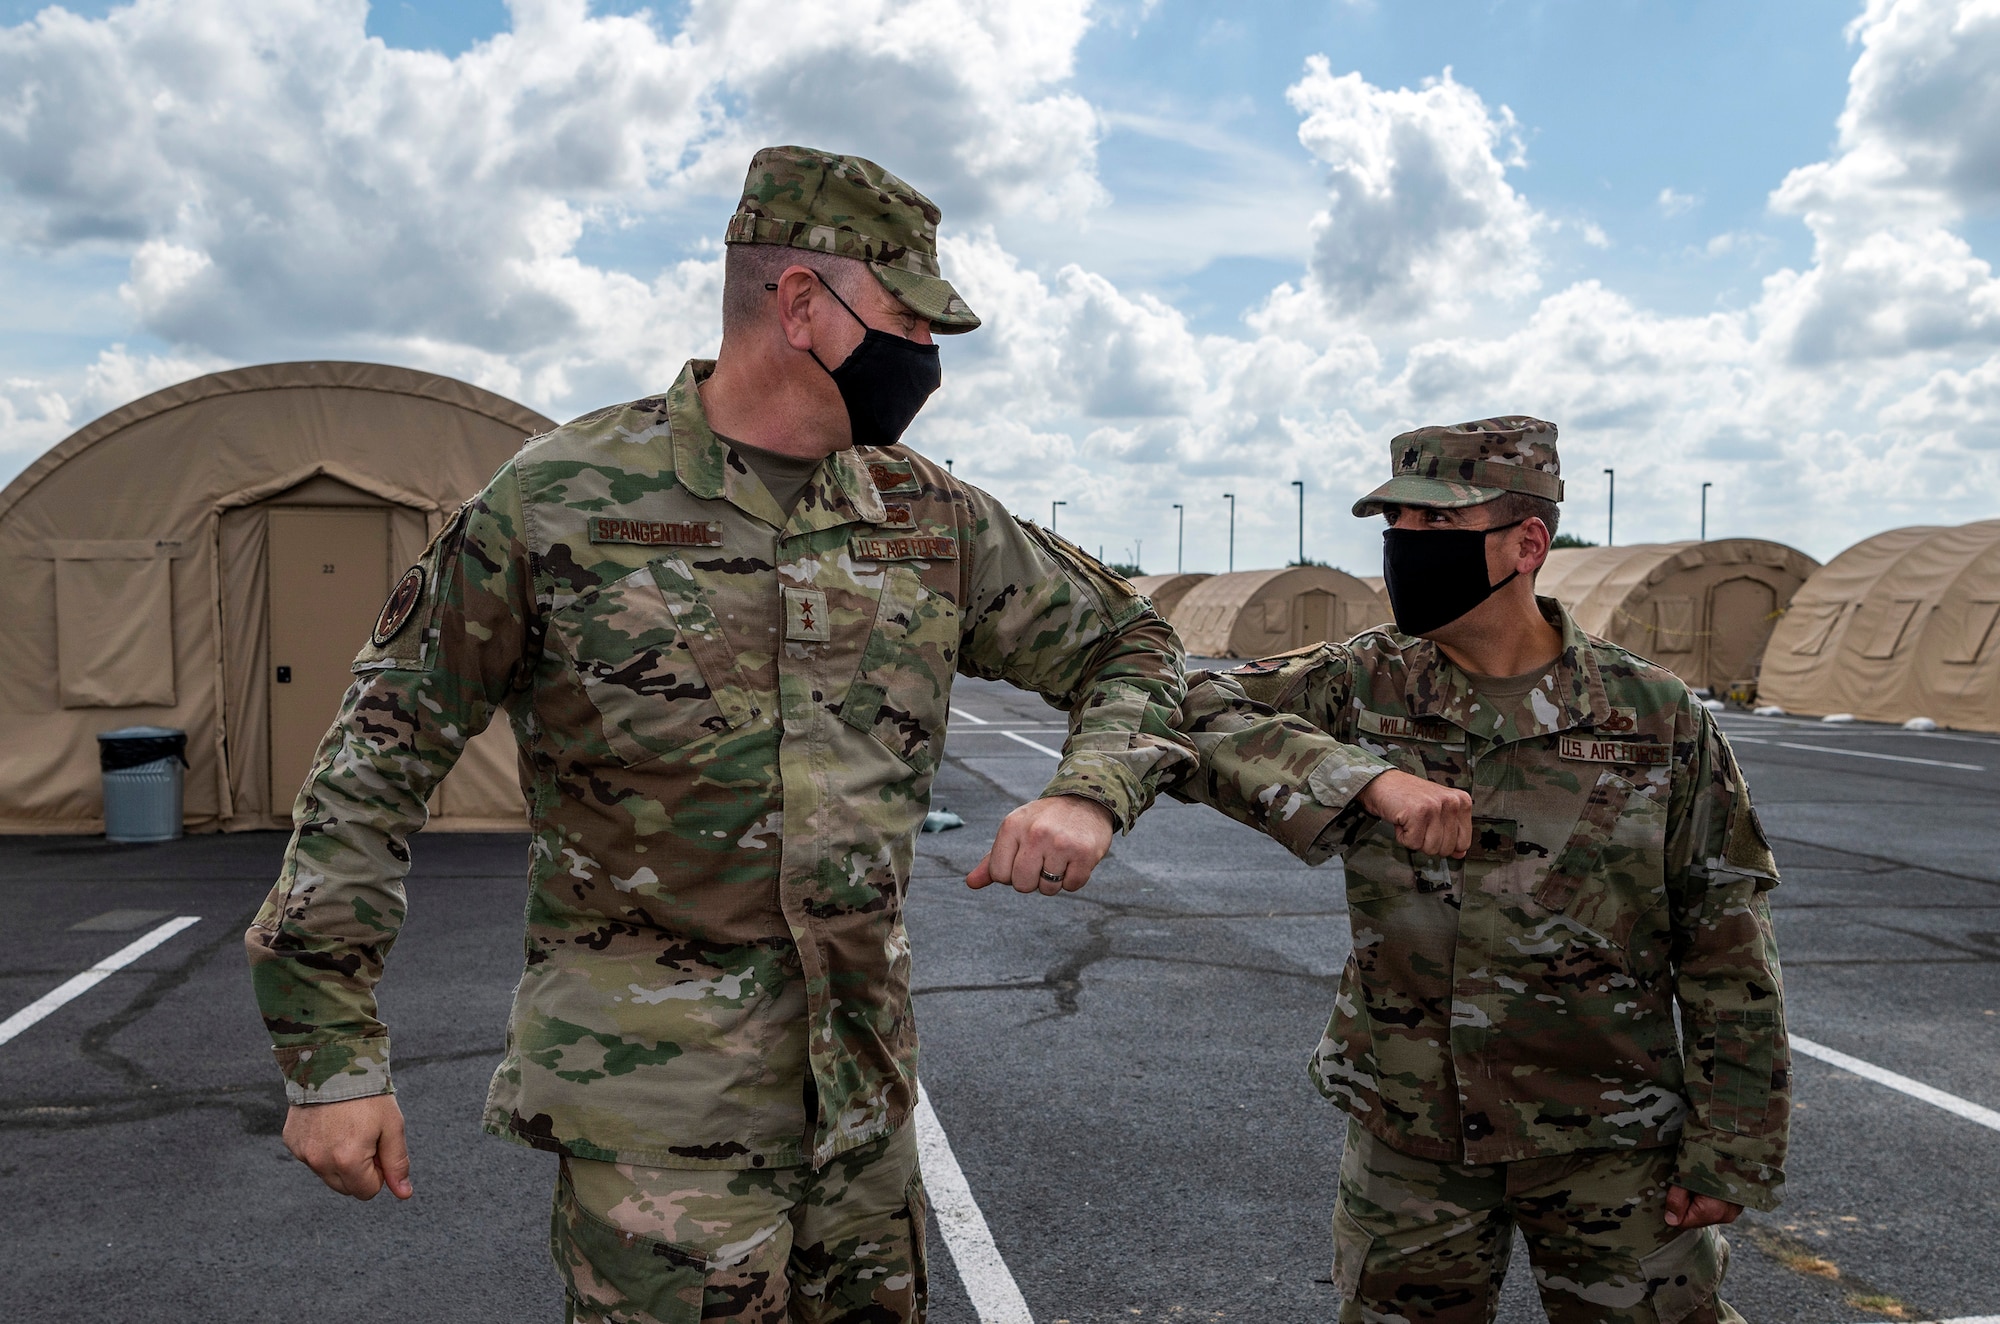 Maj. Gen. William Spangenthal, vice commander of Air Education and Training Command, elbow bumps Lt. Col. Damien Williams, 37th Training Group deputy commander, during an immersion tour June 24, 2020, at JBSA-Lackland, Texas.